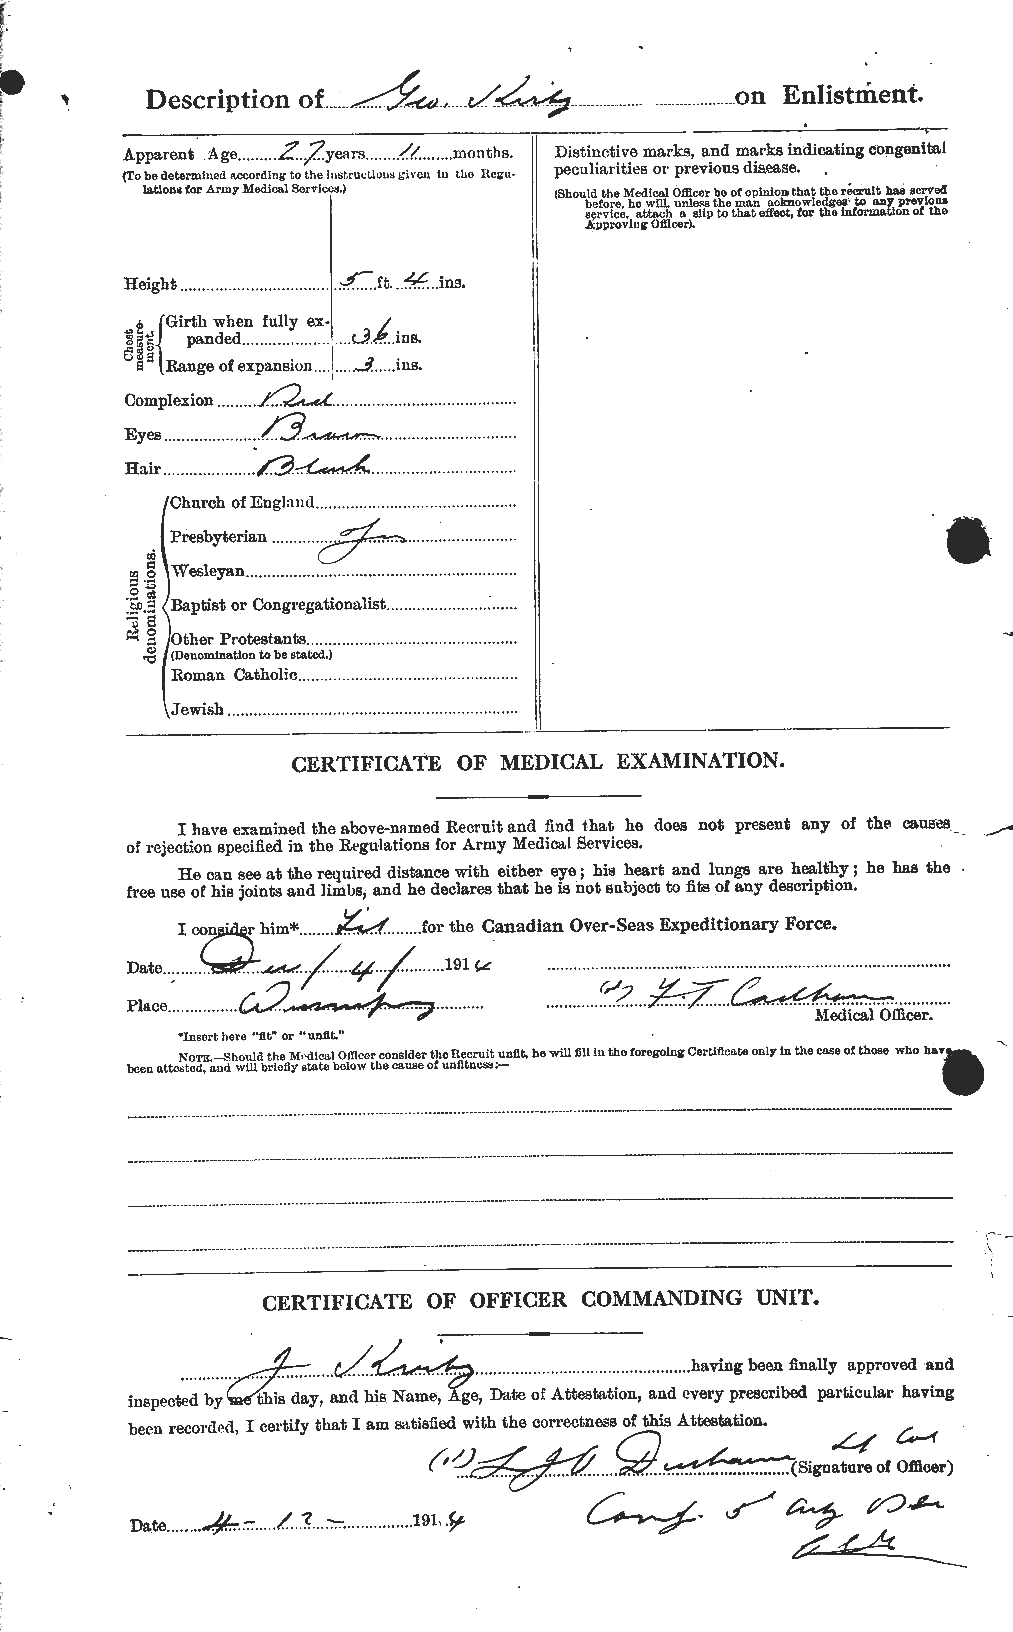 Personnel Records of the First World War - CEF 691552b